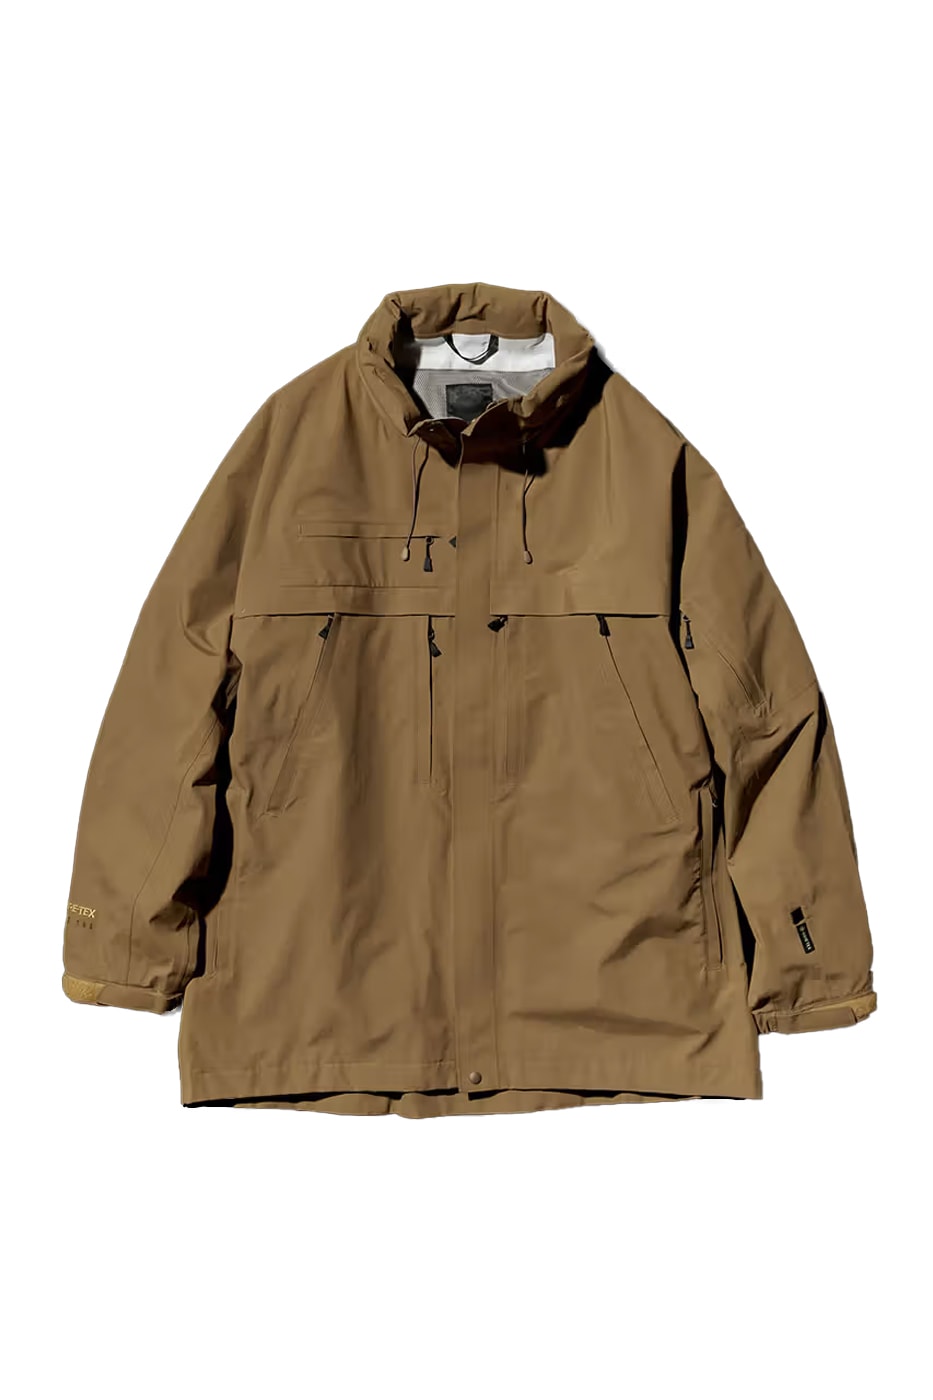 https://image-cdn.hypb.st/https%3A%2F%2Fhypebeast.com%2Fimage%2F2023%2F04%2Fdaiwa-pier39-two-limited-edition-gore-tex-technical-jackets-spring-summer-2023-release-info-008.jpg?cbr=1&q=90